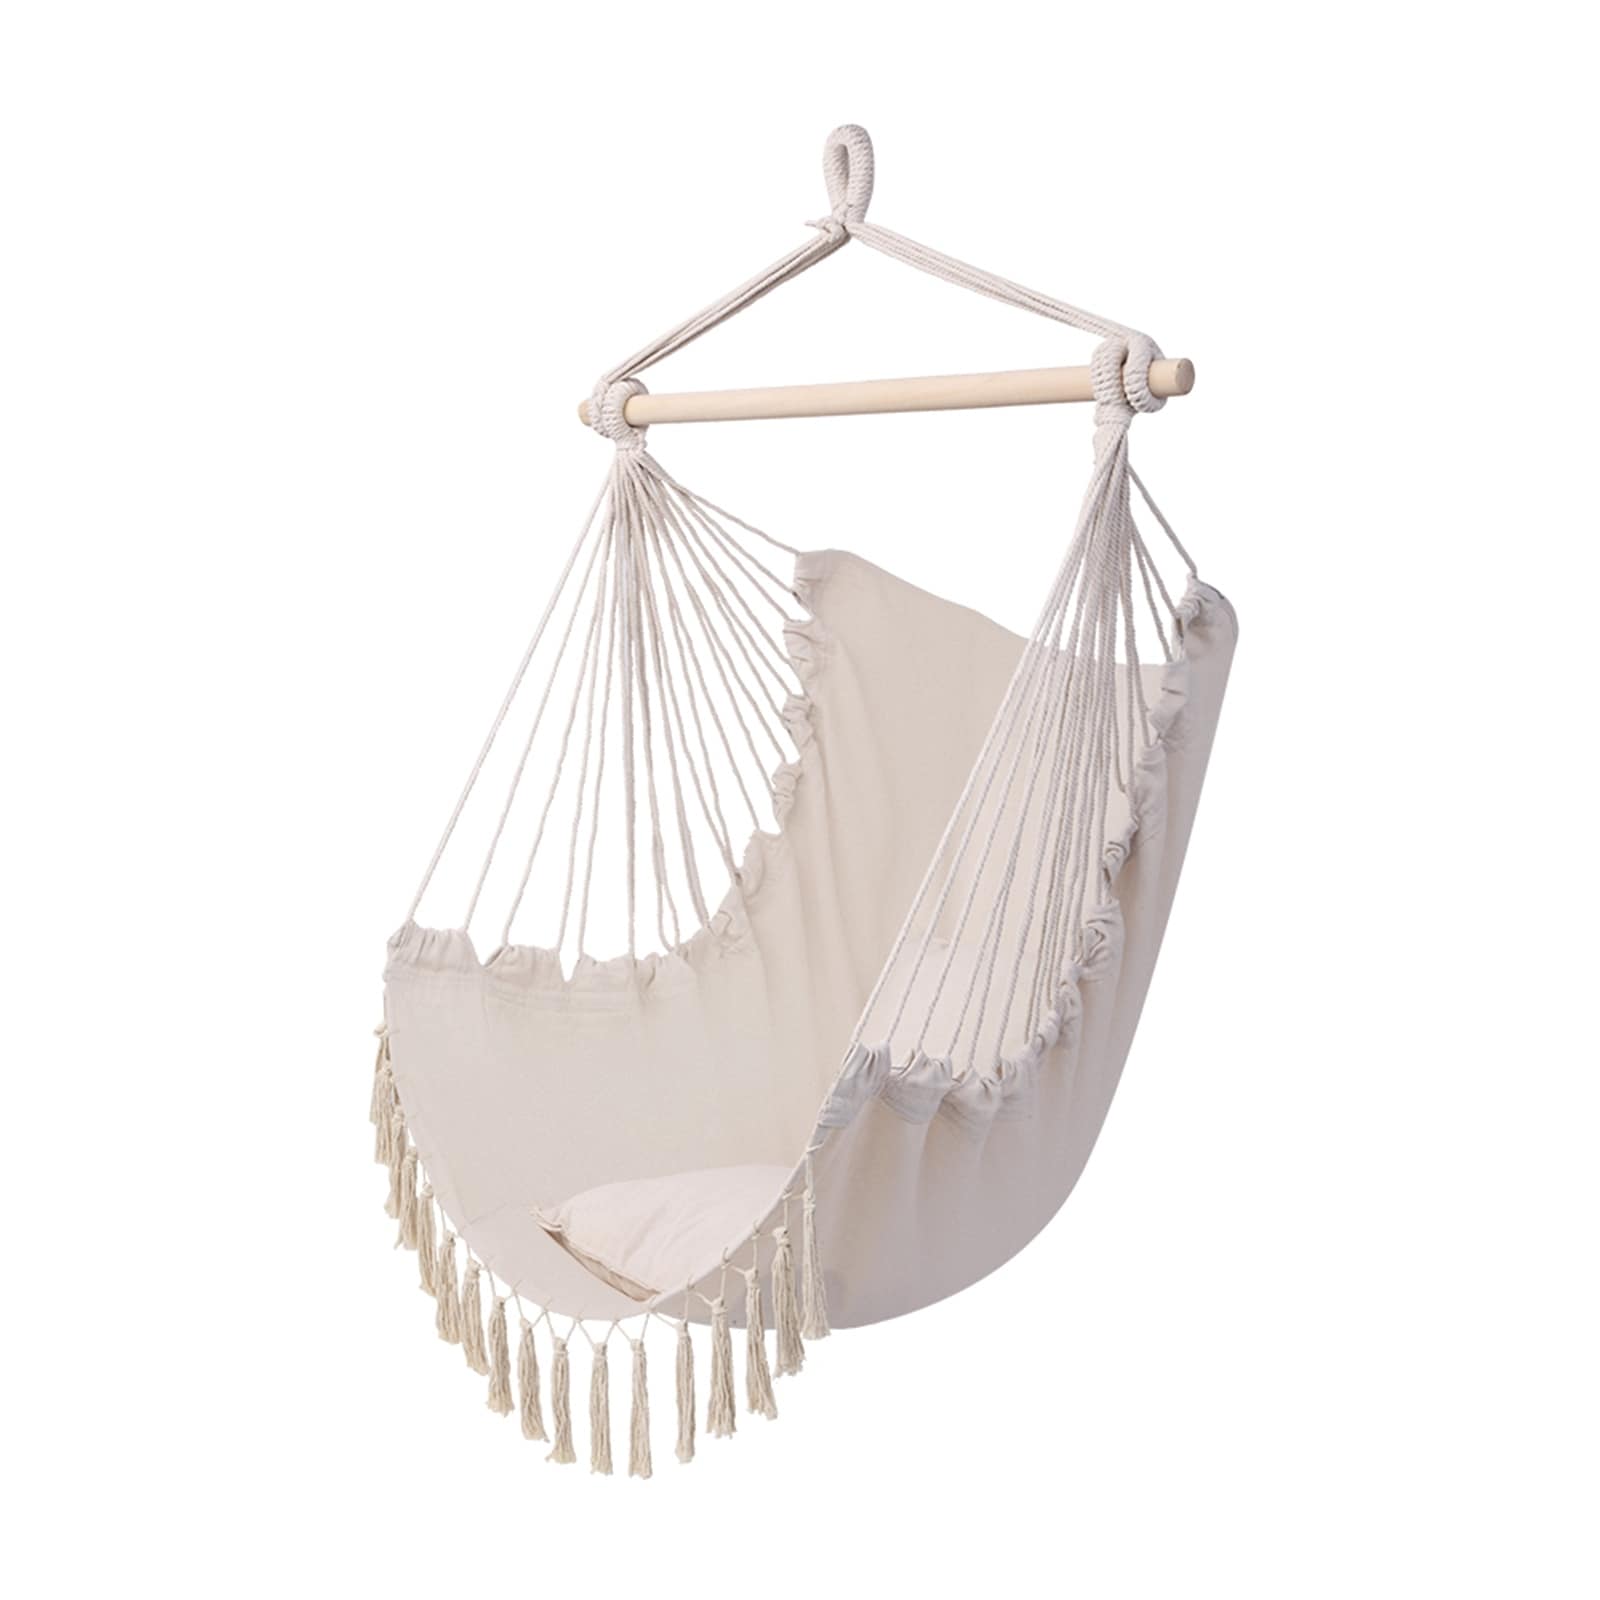 Hammock Chair Hanging Rope Swing For Indoor And Outdoor